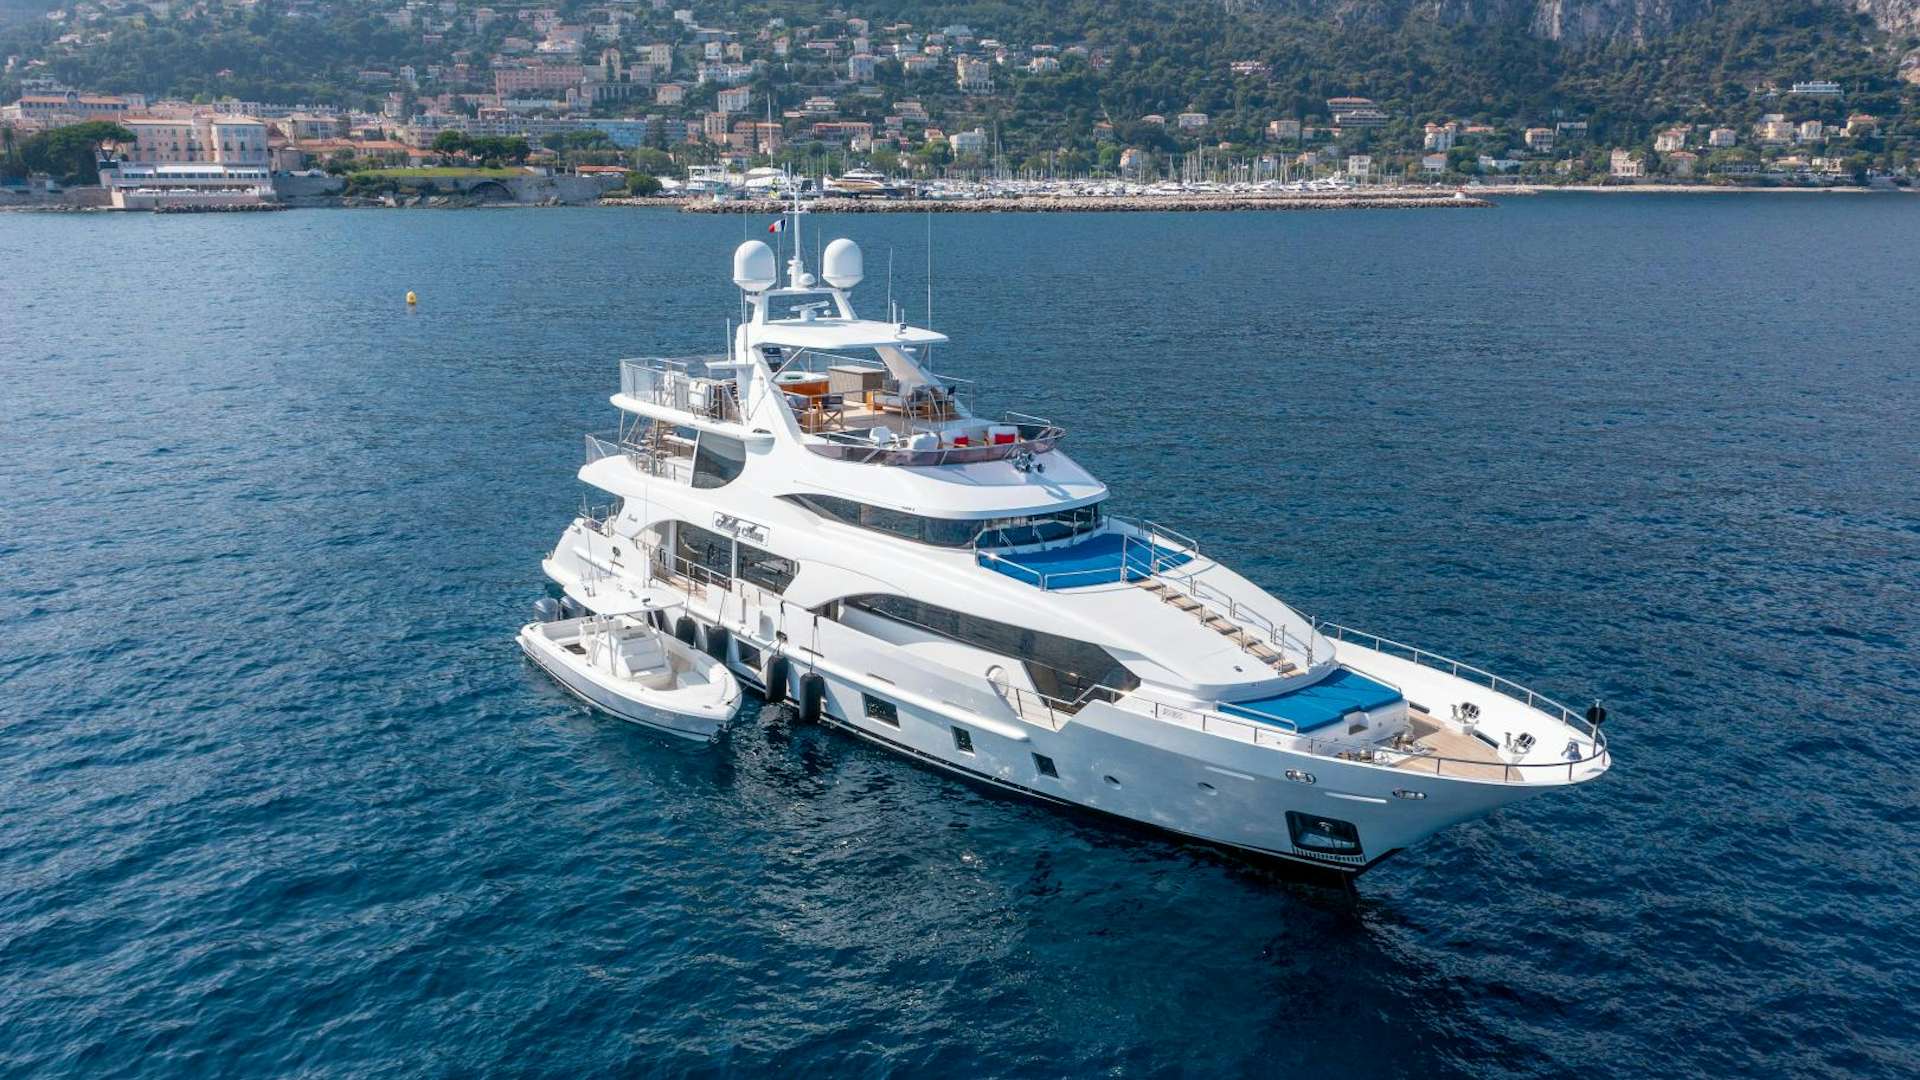 Watch Video for JUS CHILL'N 3 Yacht for Sale